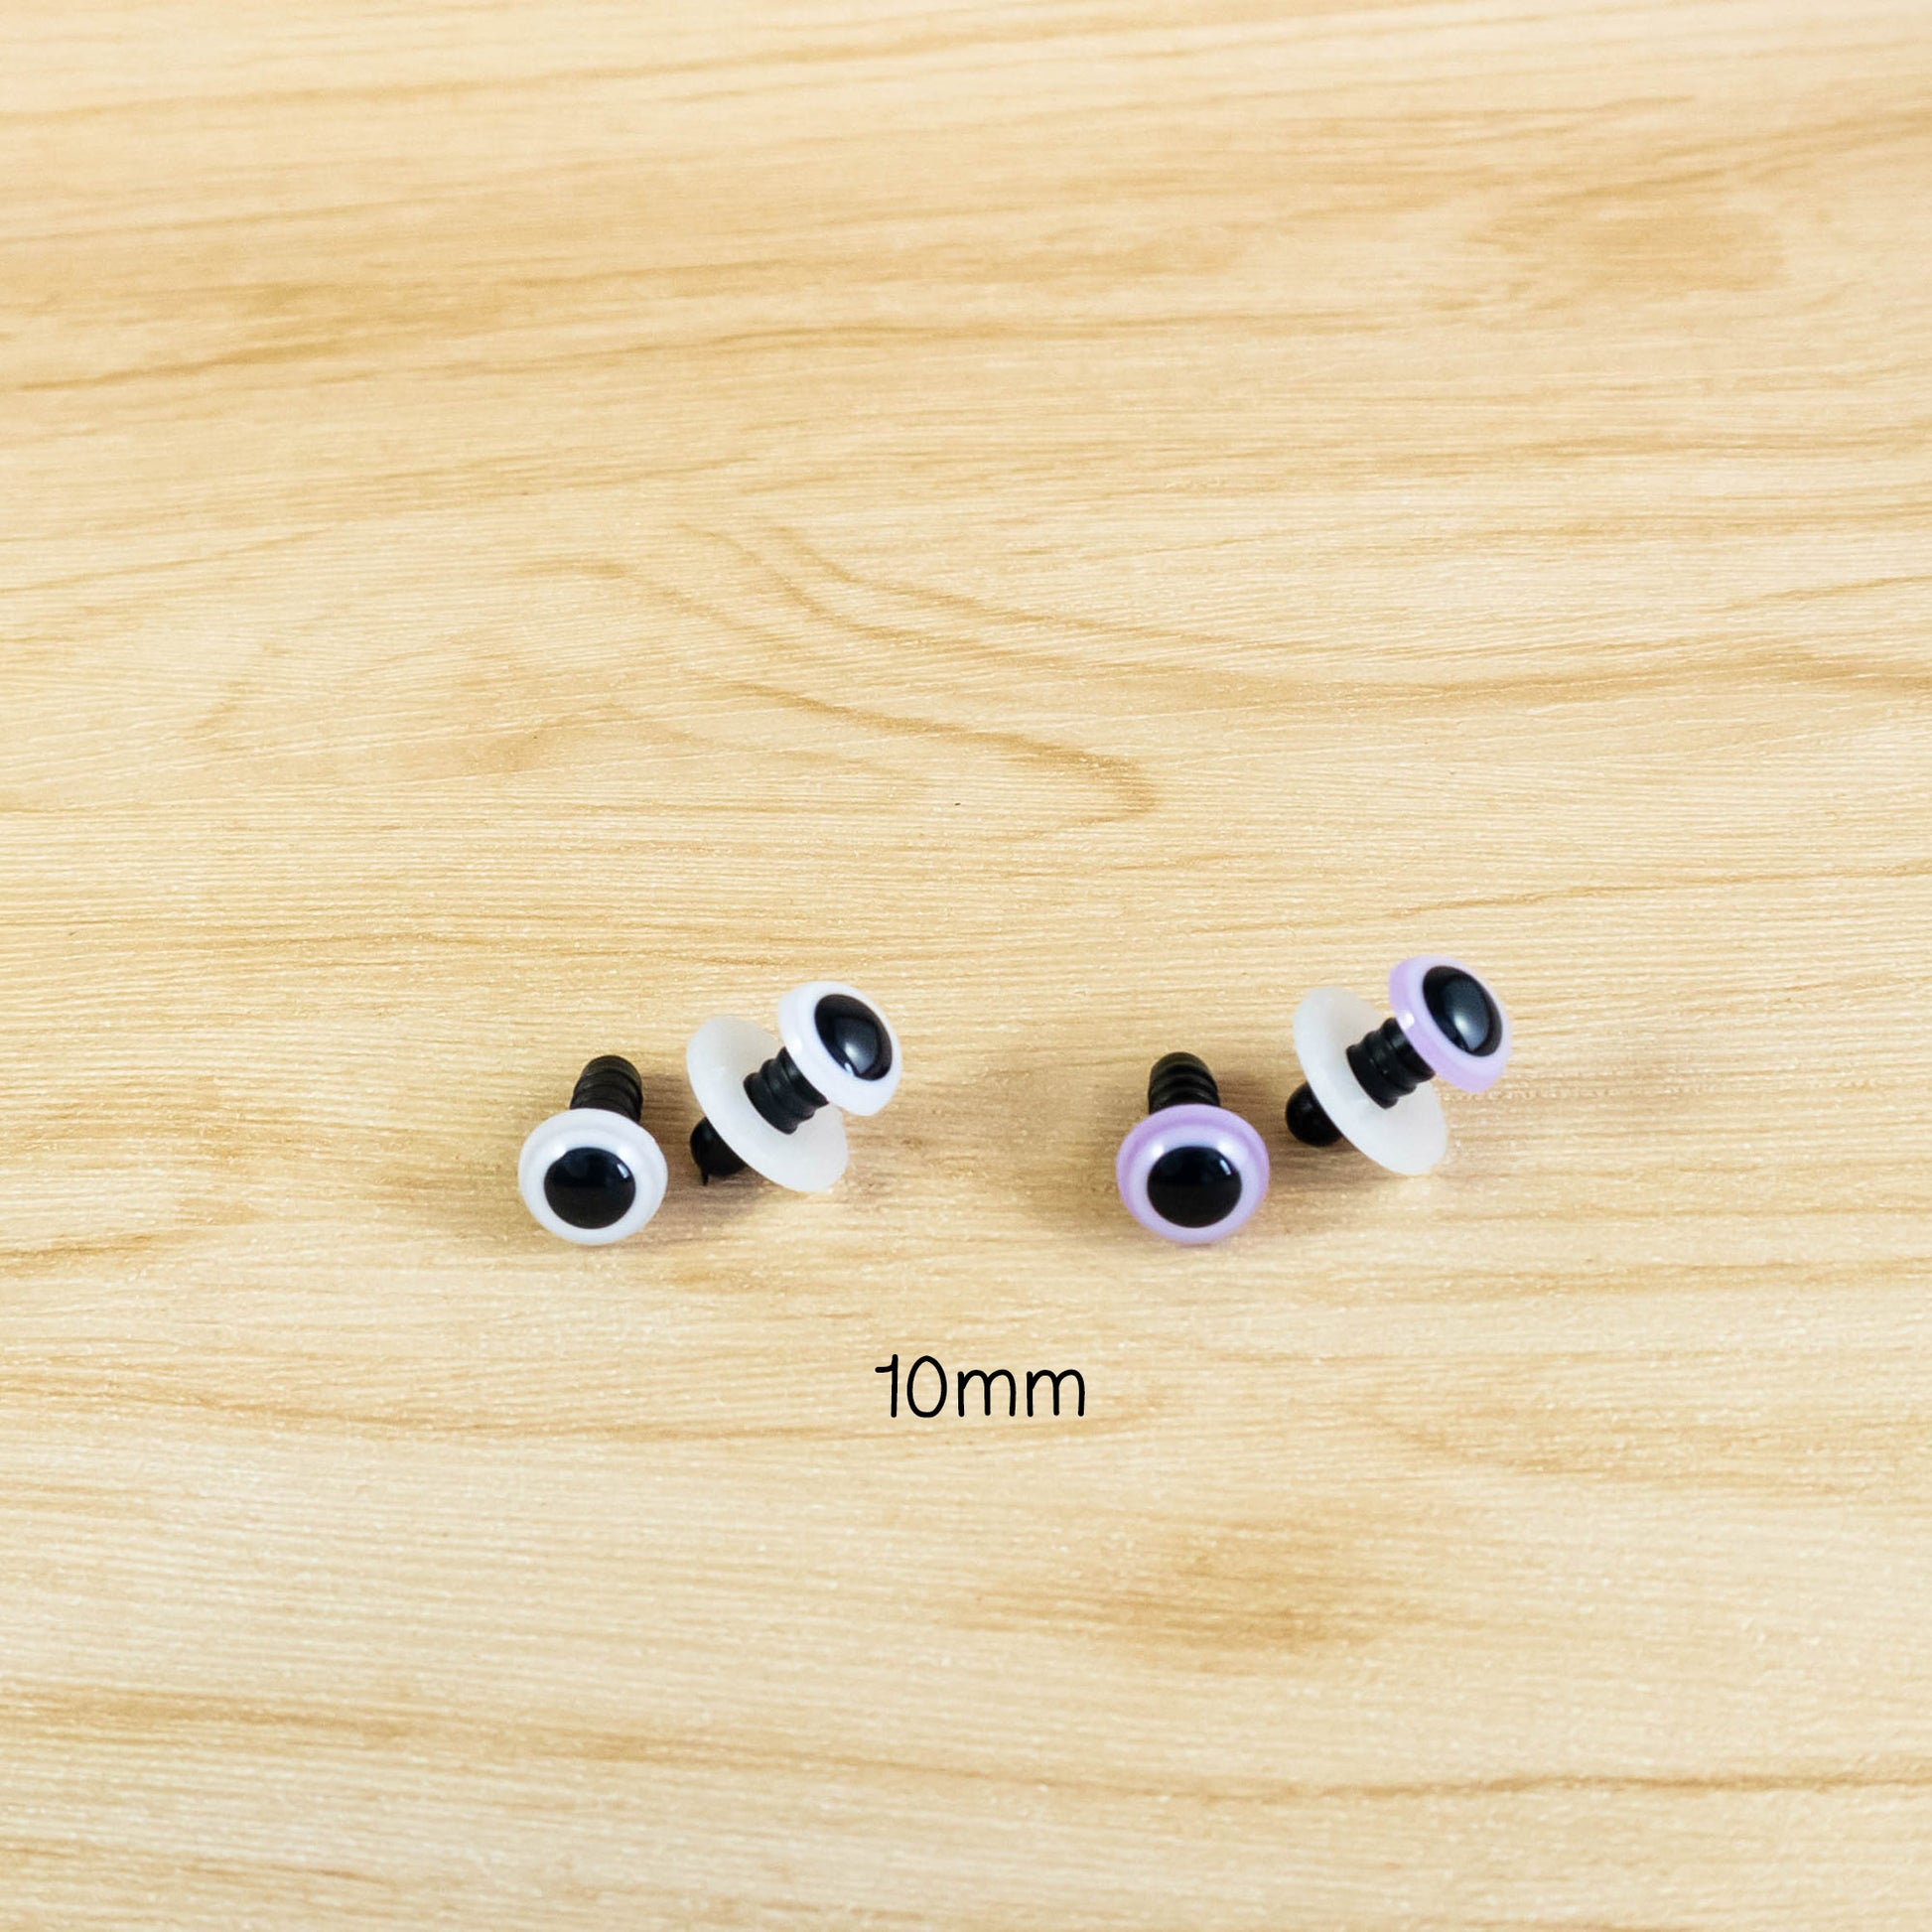 10mm white toy eyes and 10mm purple toy eyes